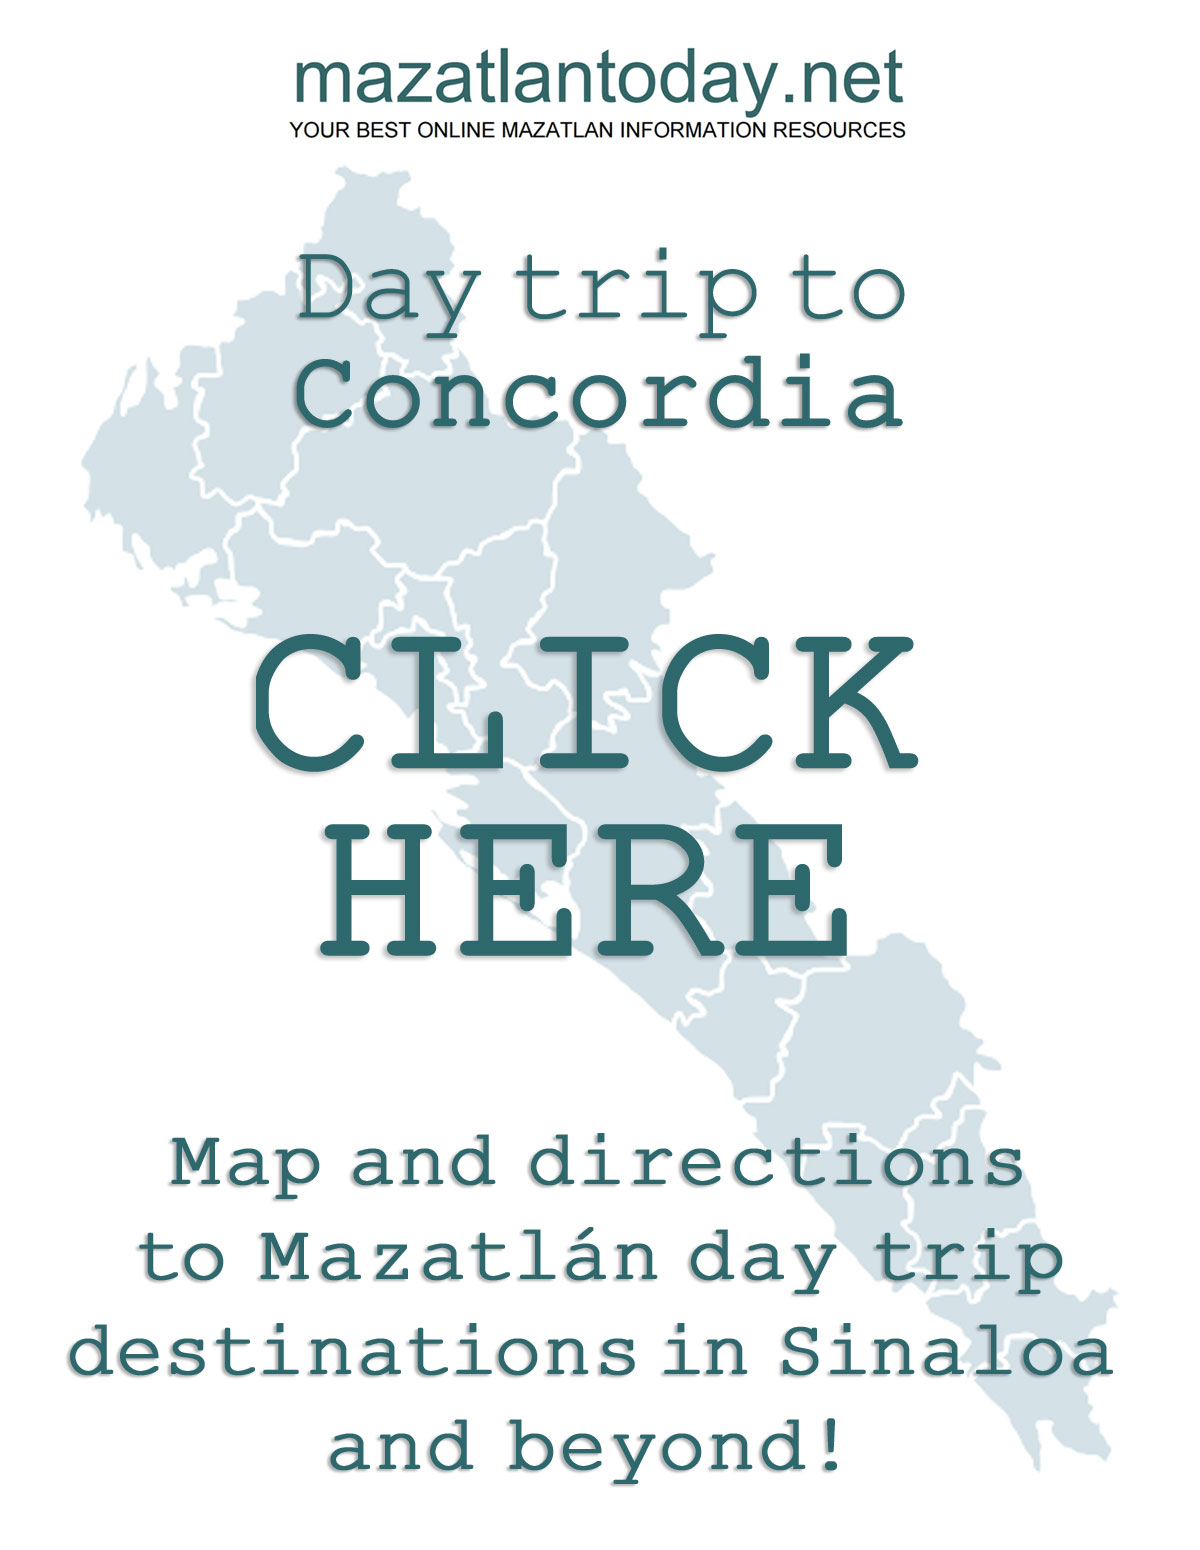 Download free Mazatlan - Concordia day trip map and directions